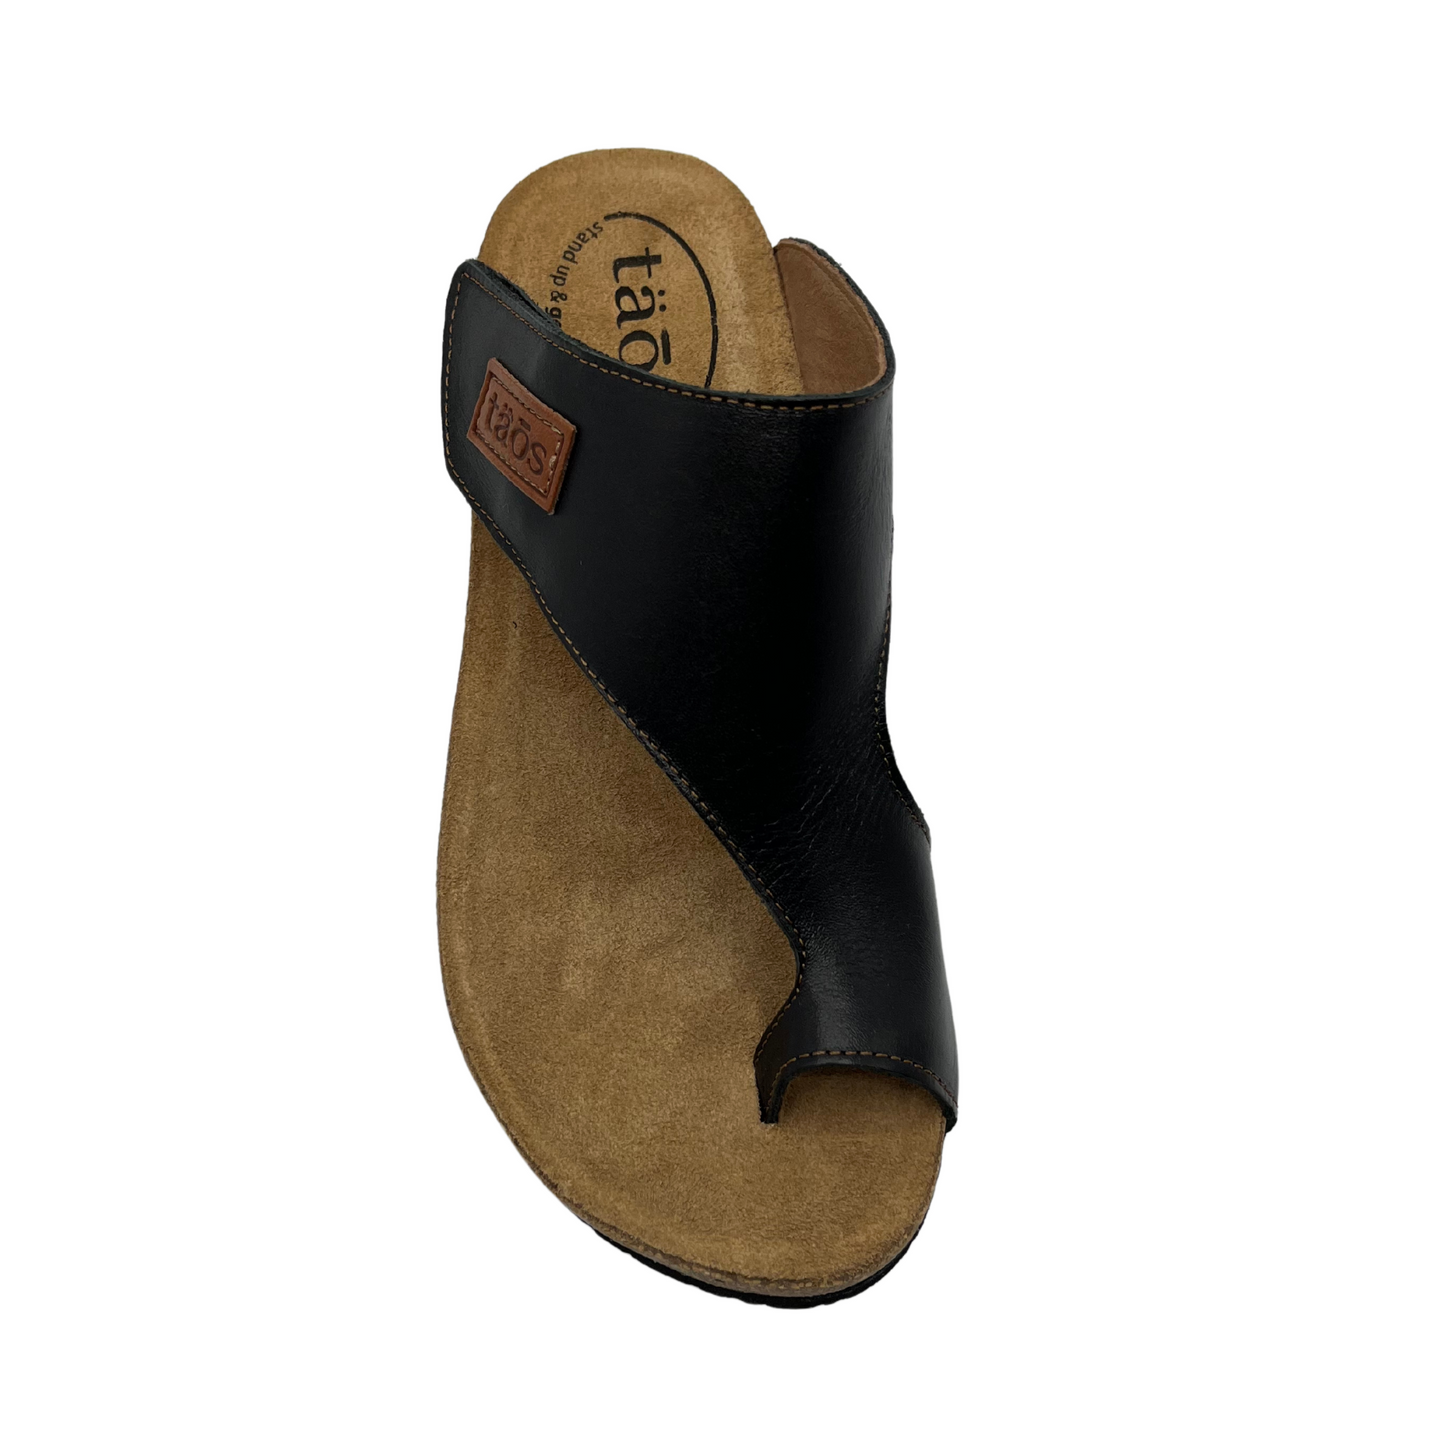 Top view of black leather sandal with brown leather lined footbed. Hook and loop closure on strap and toe strap